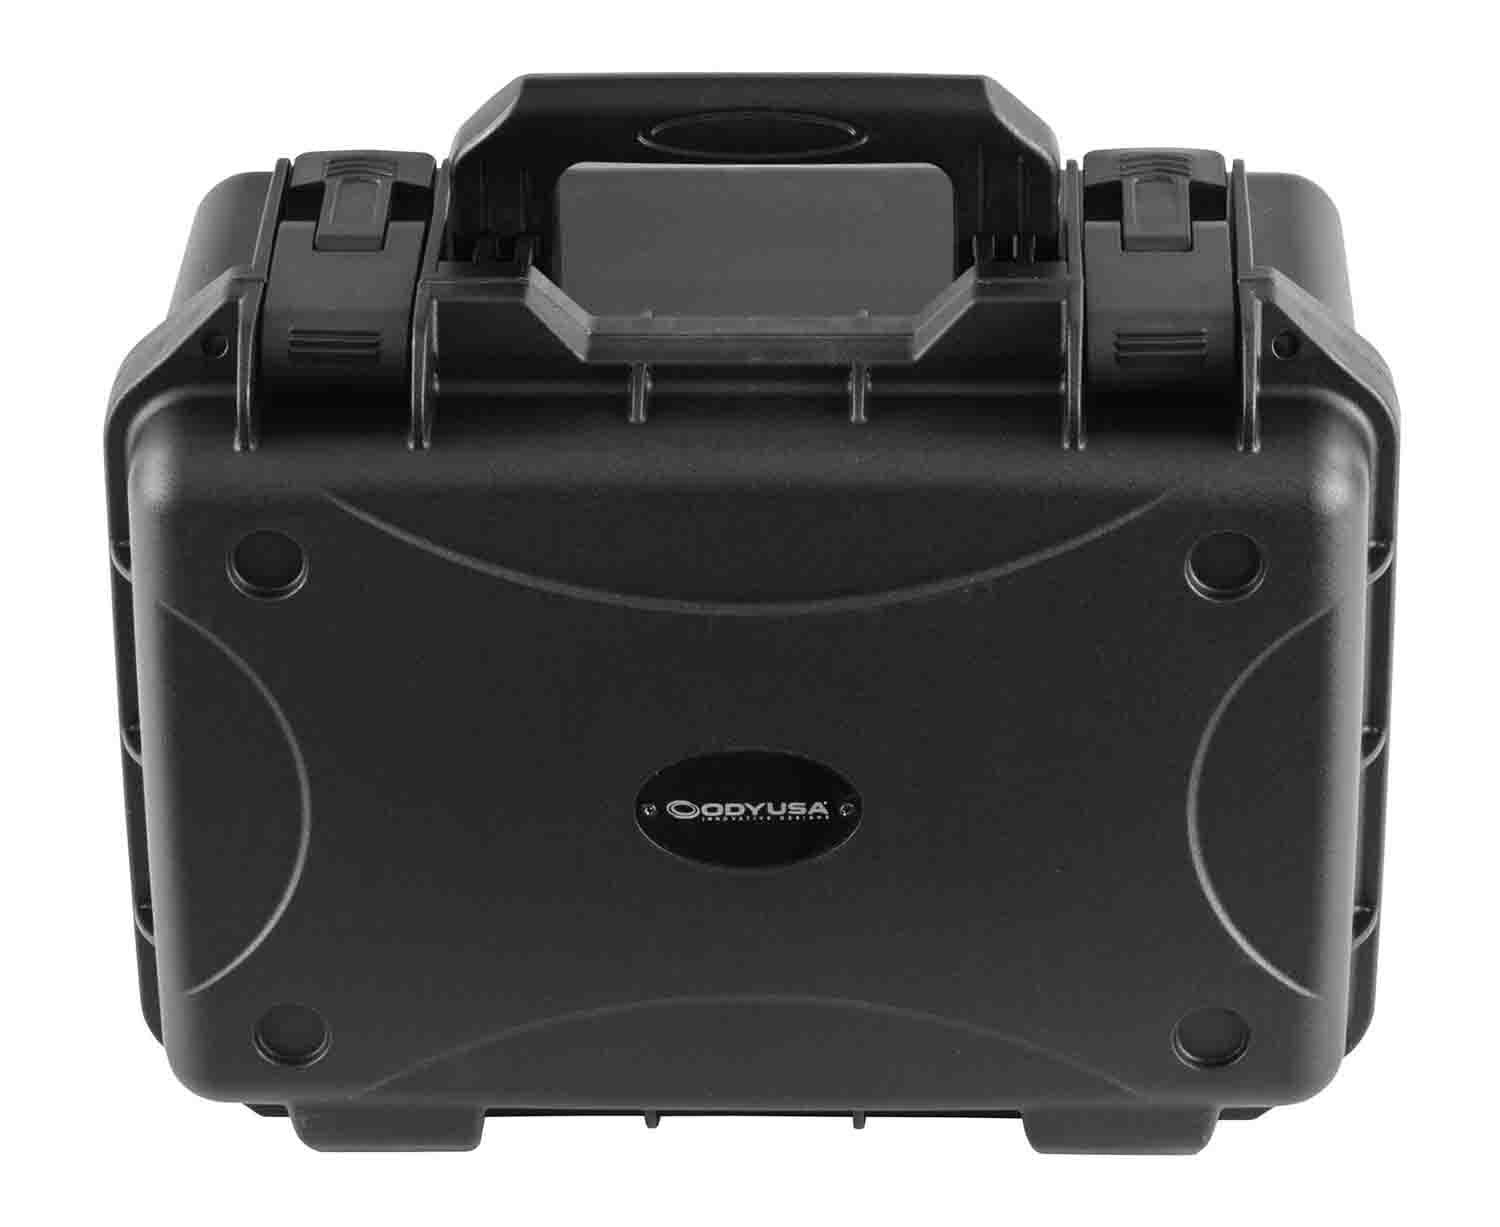 Odyssey VU120806 Vulcan Injection-Molded Utility Case with Pluck Foam - 13 x 8.25 x 5" Interior - Hollywood DJ